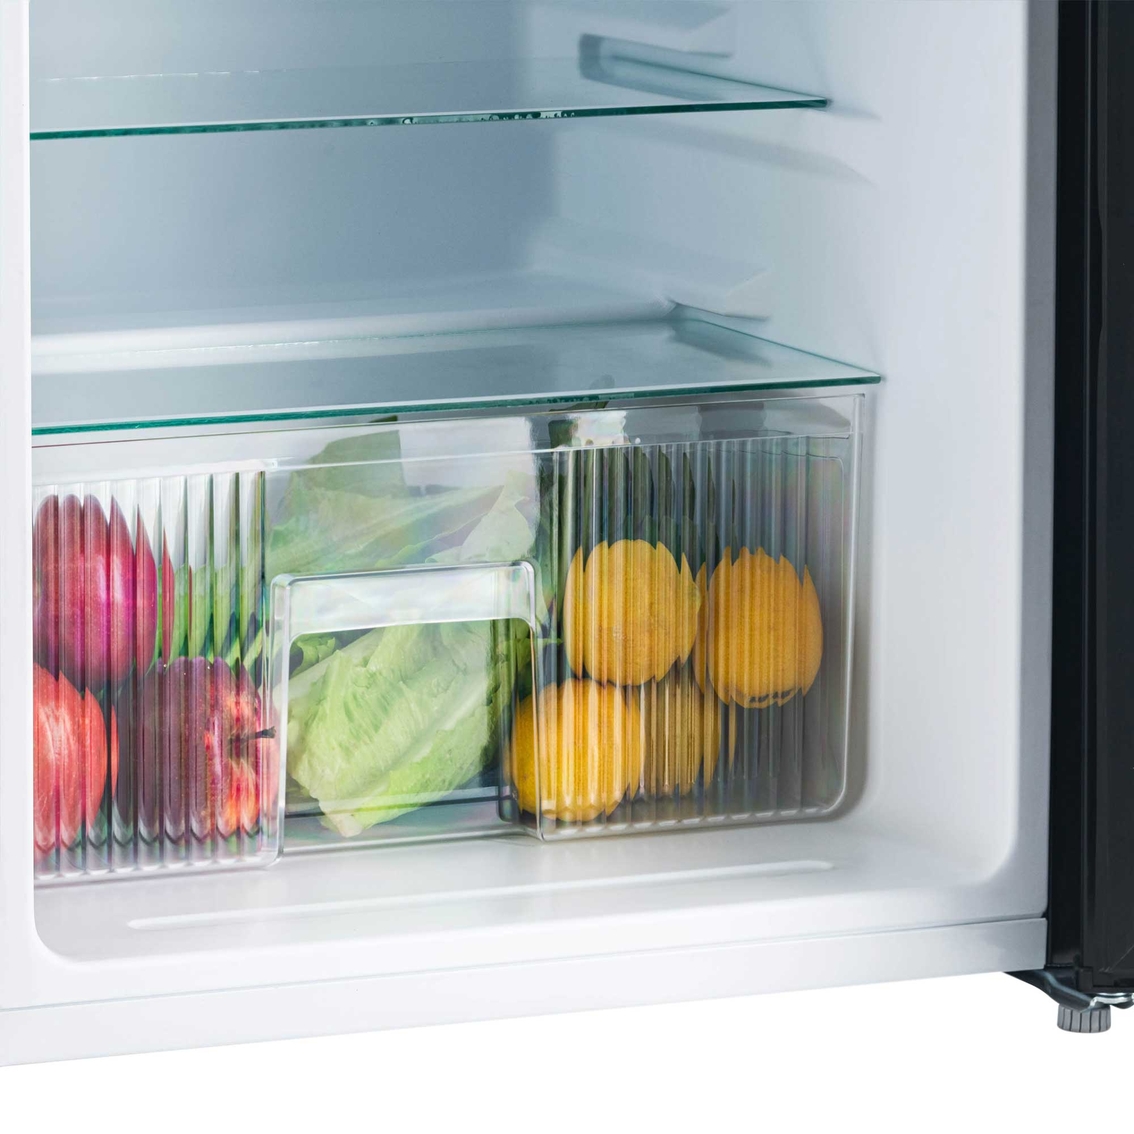 New Air LLC Compact Mini Refrigerator with Freezer and Can Dispenser - Image 6 of 10